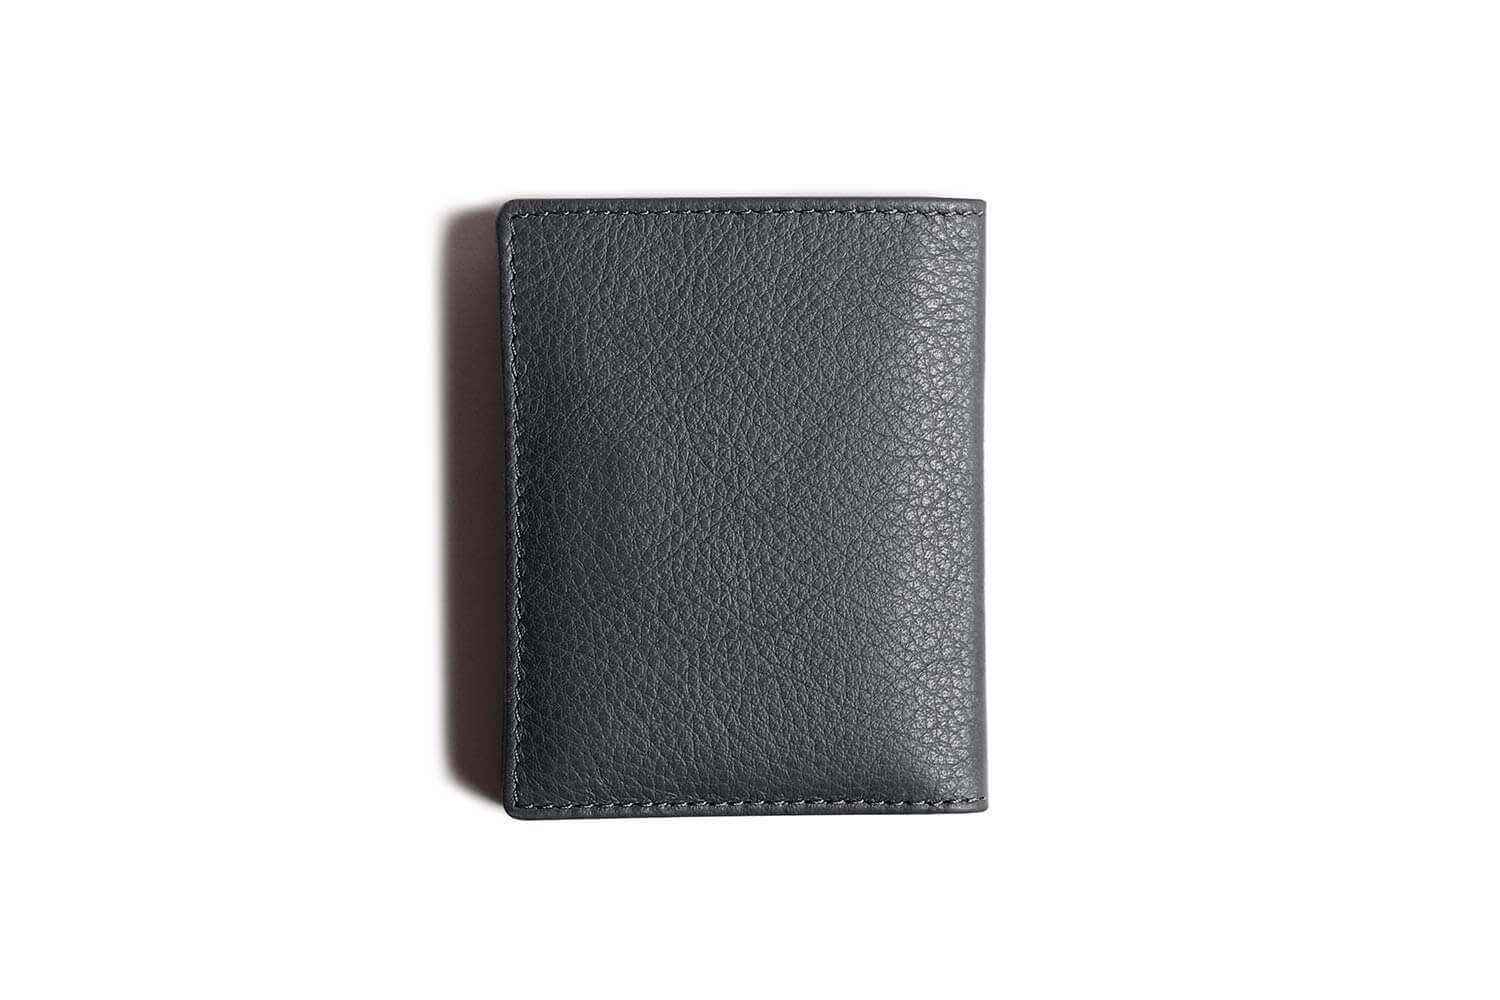 Passport Holder Wallet with Coin Pocket, Card Holder, Cash (Brown) - Incredible Gifts By Incredible Gifts